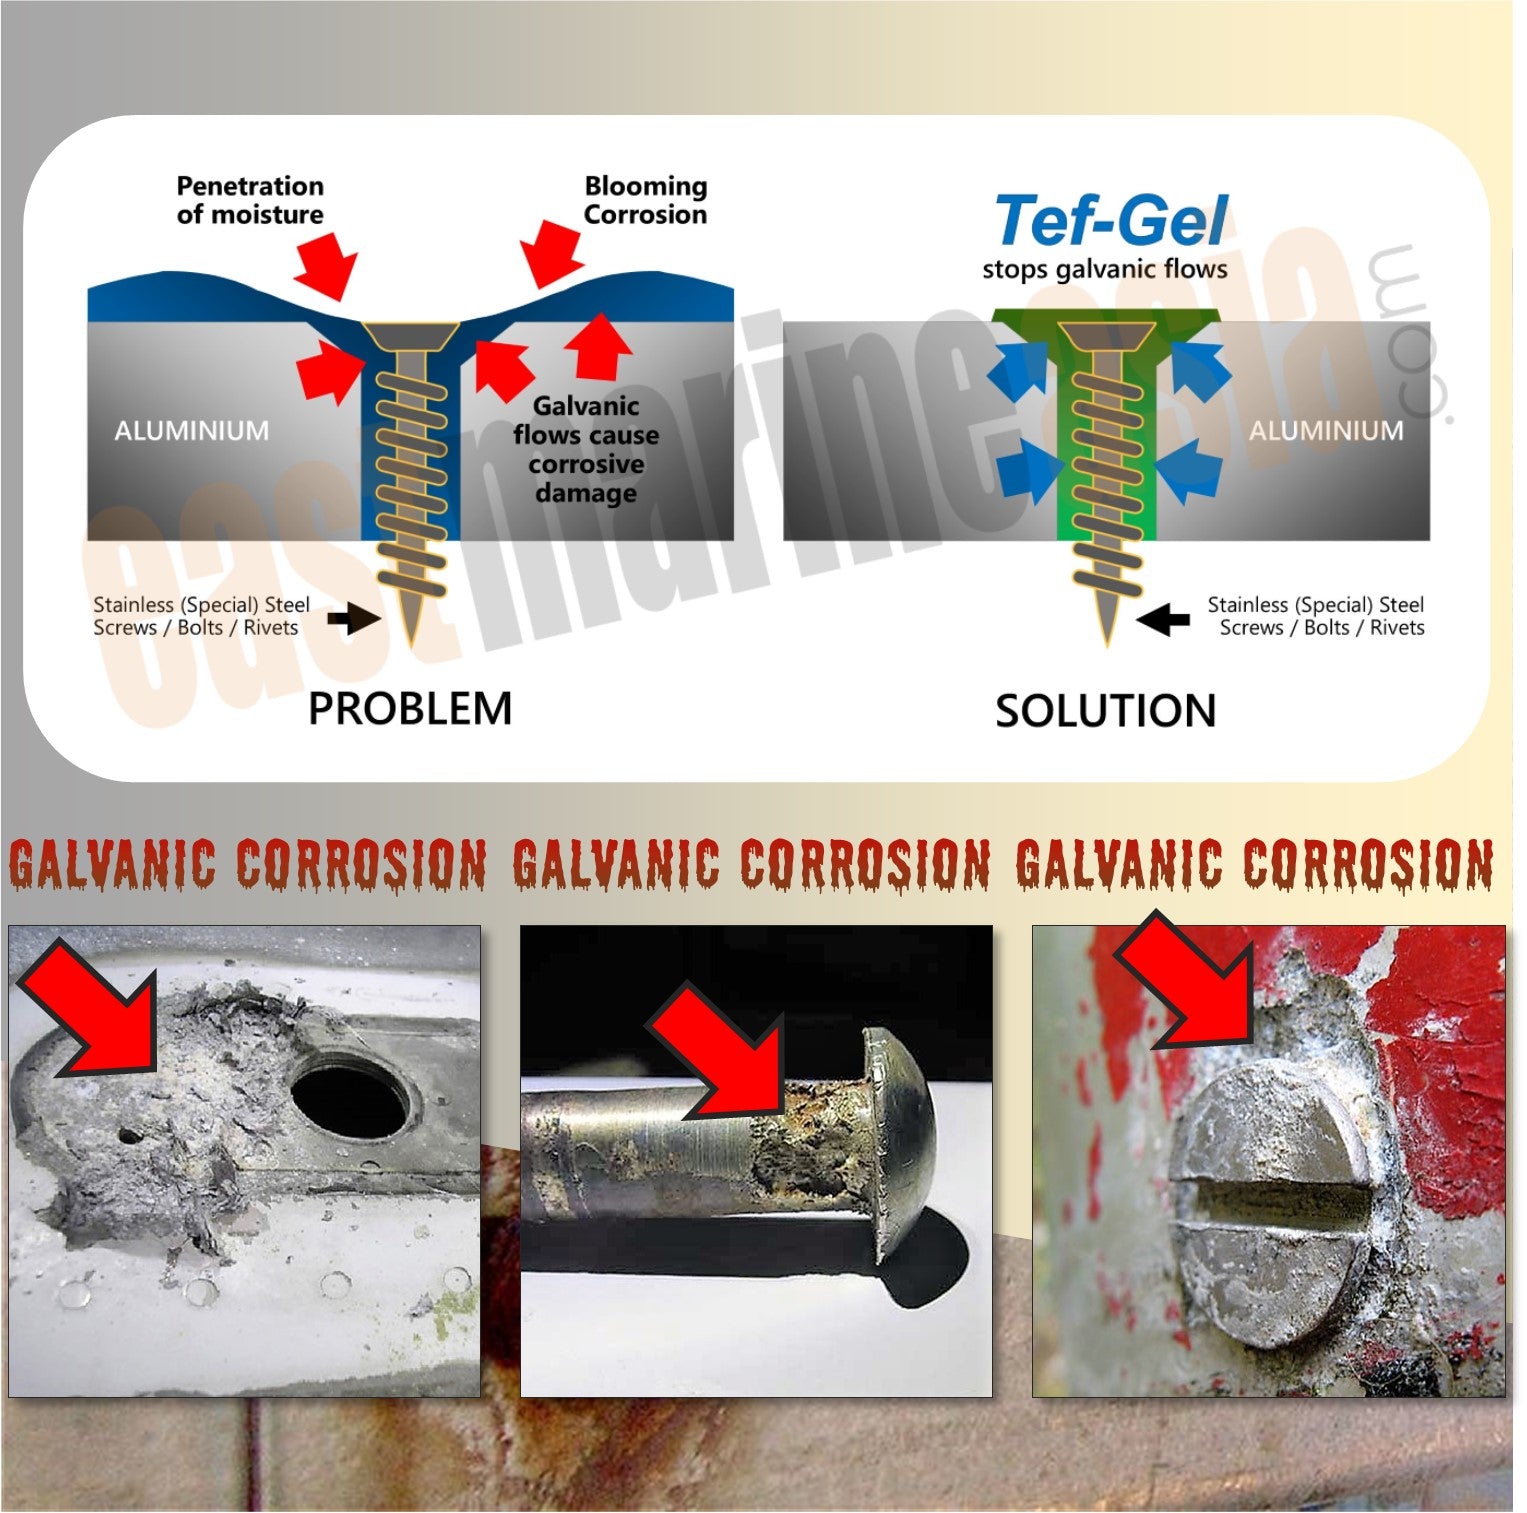 How to Stop ☠ Galvanic Corrosion ☠